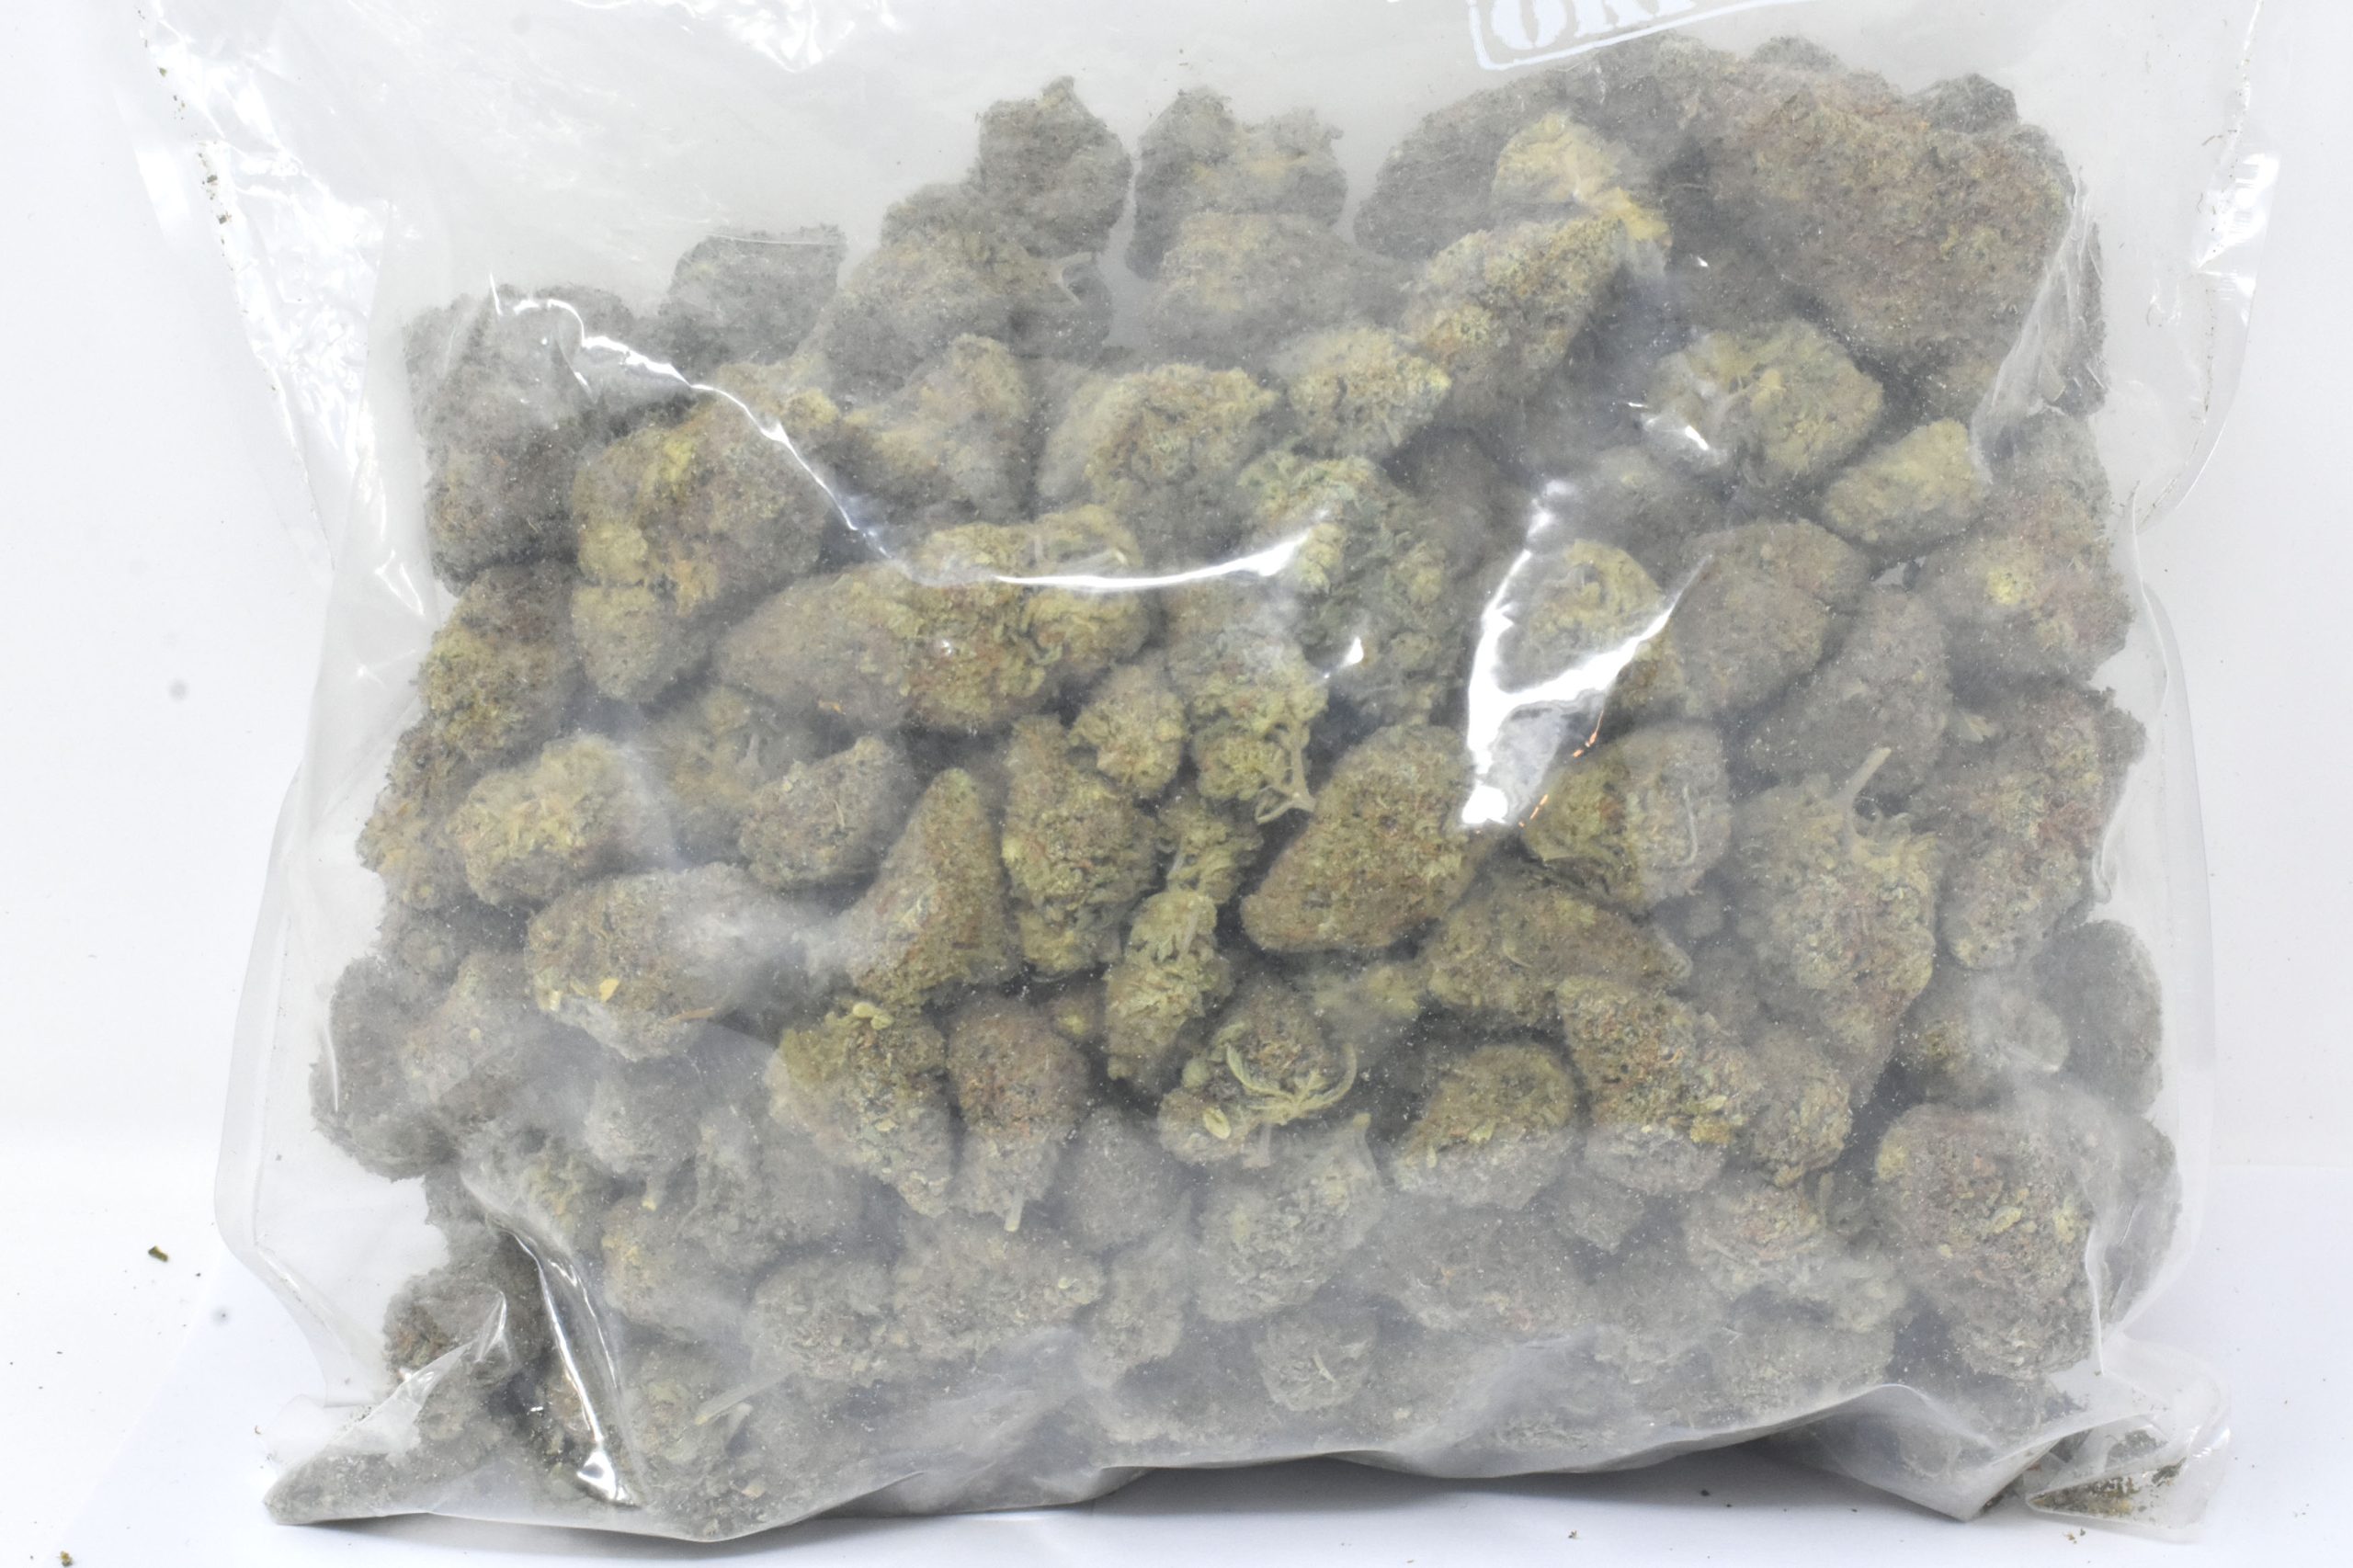 buy-chocolope-AA-flower-at-chronicfarms.cc-online-weed-dispensary